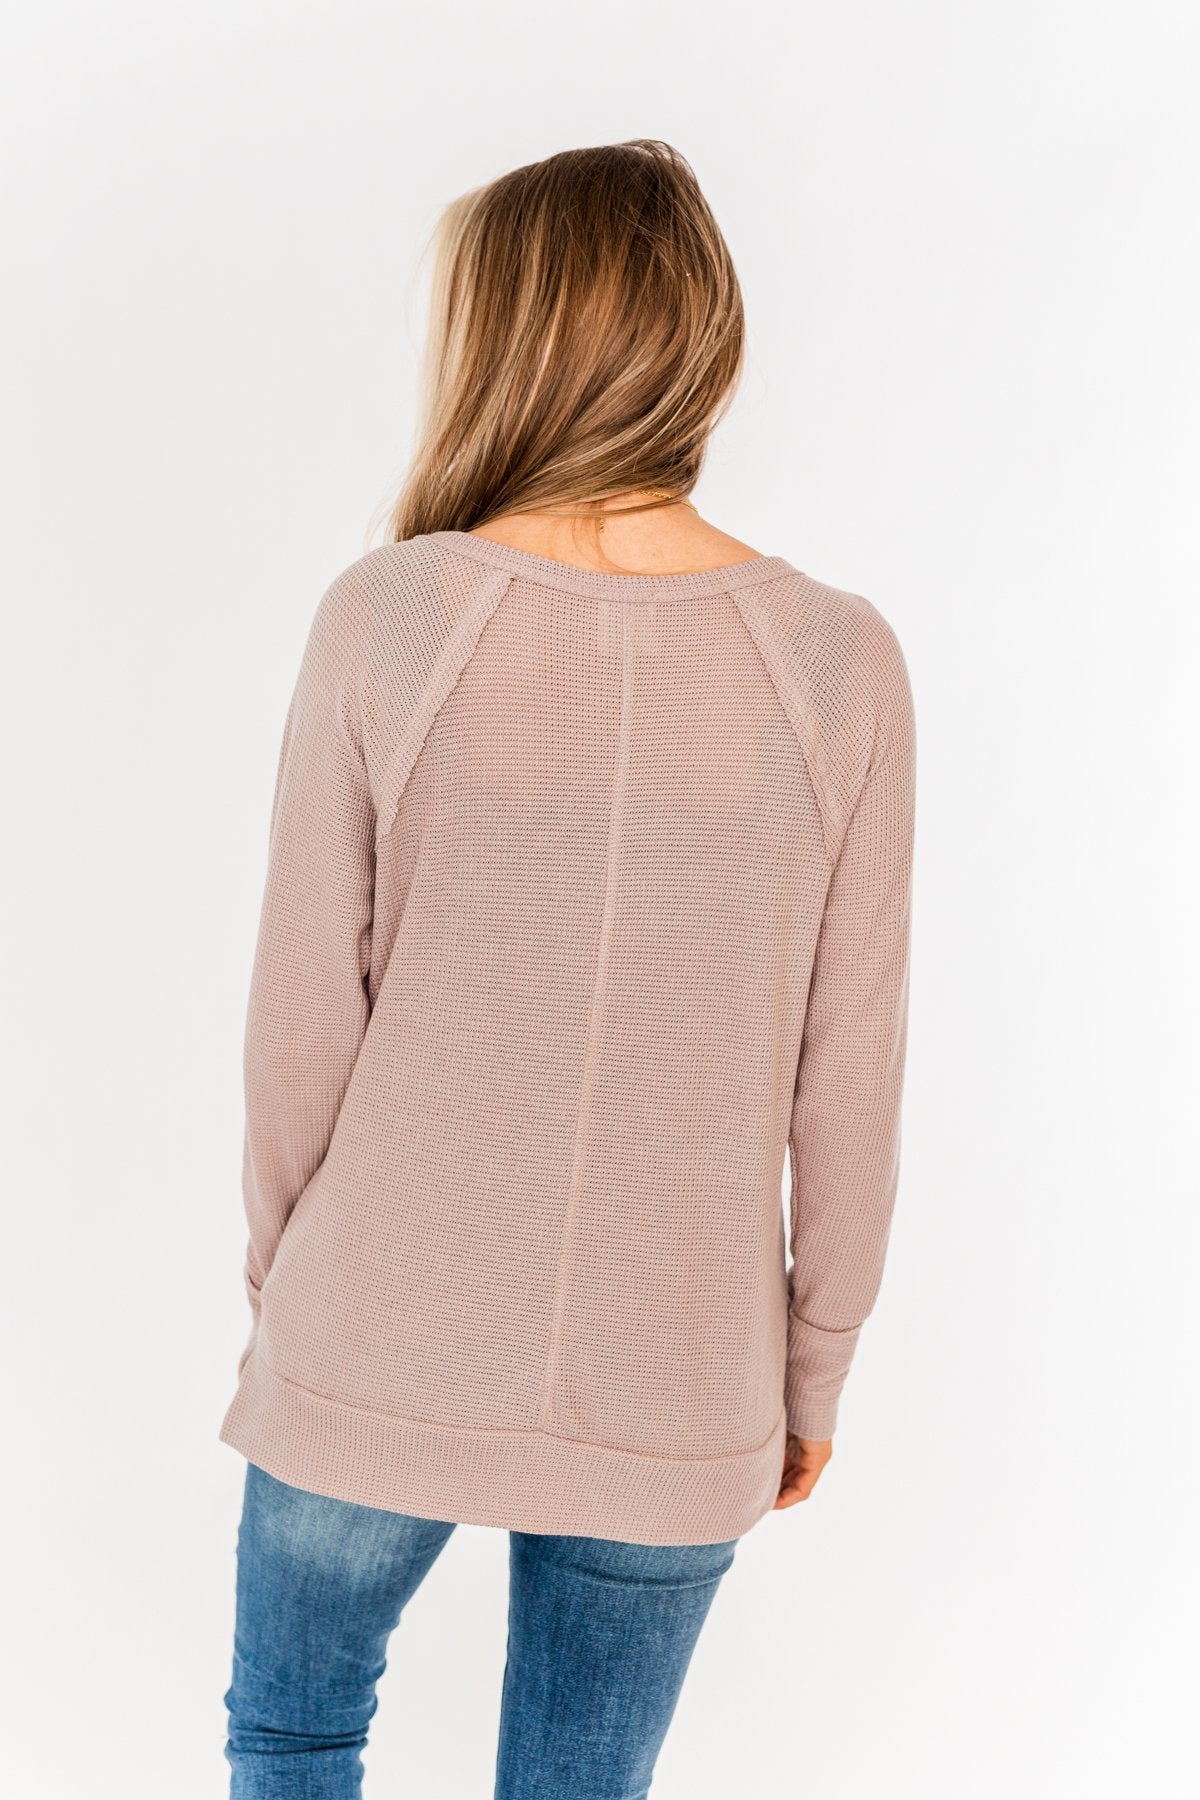 There You Go Again Thermal Notch Top- Dusty Mauve